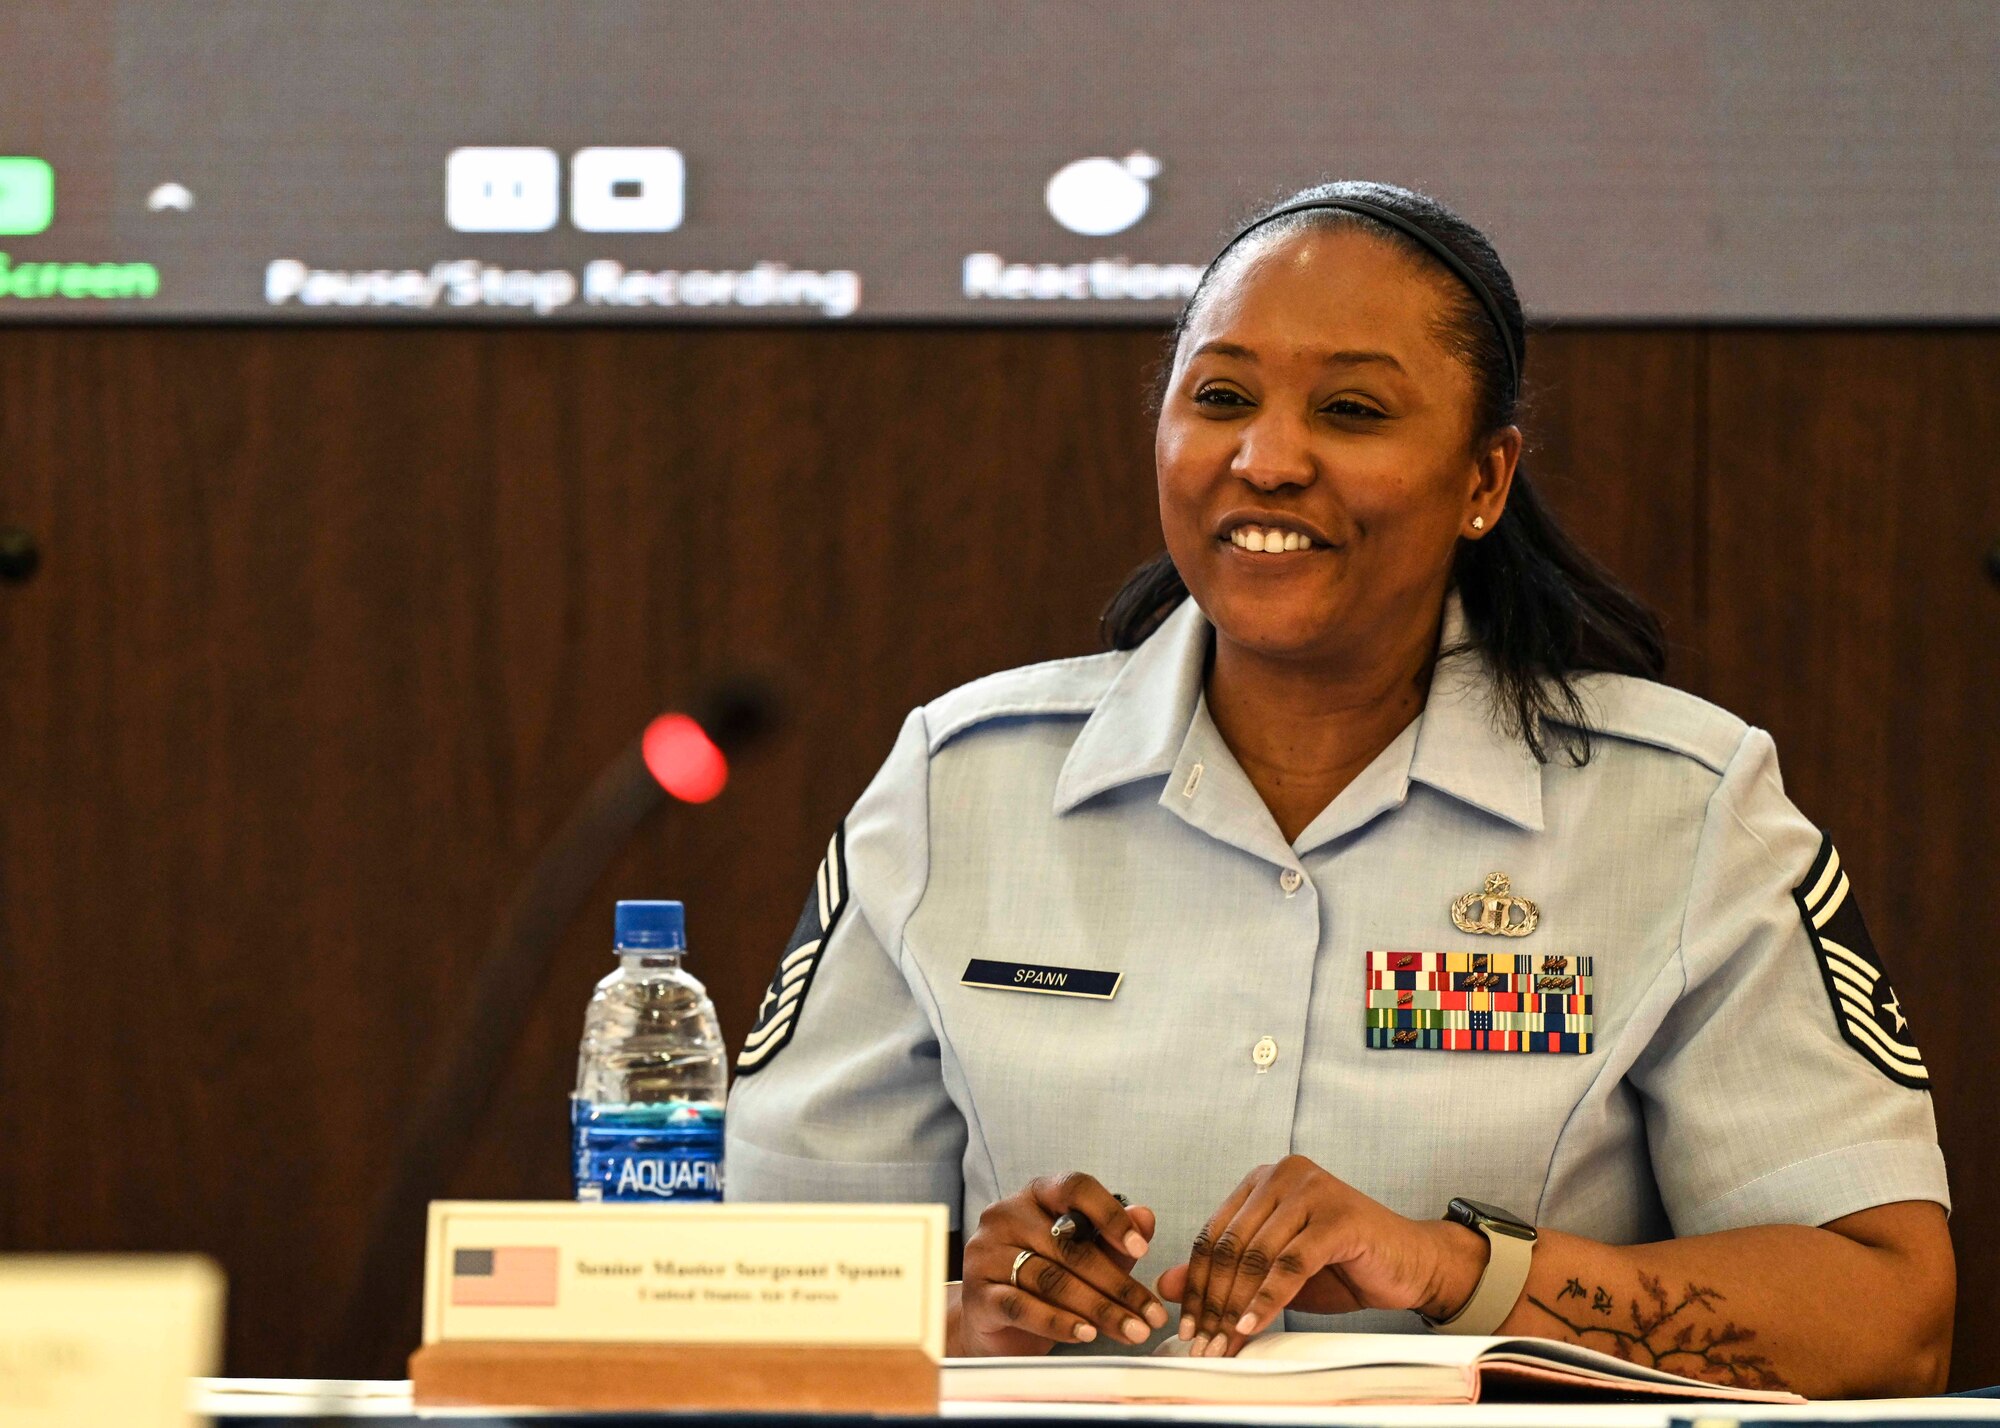 Image from Women, Peace, and Security Symposium